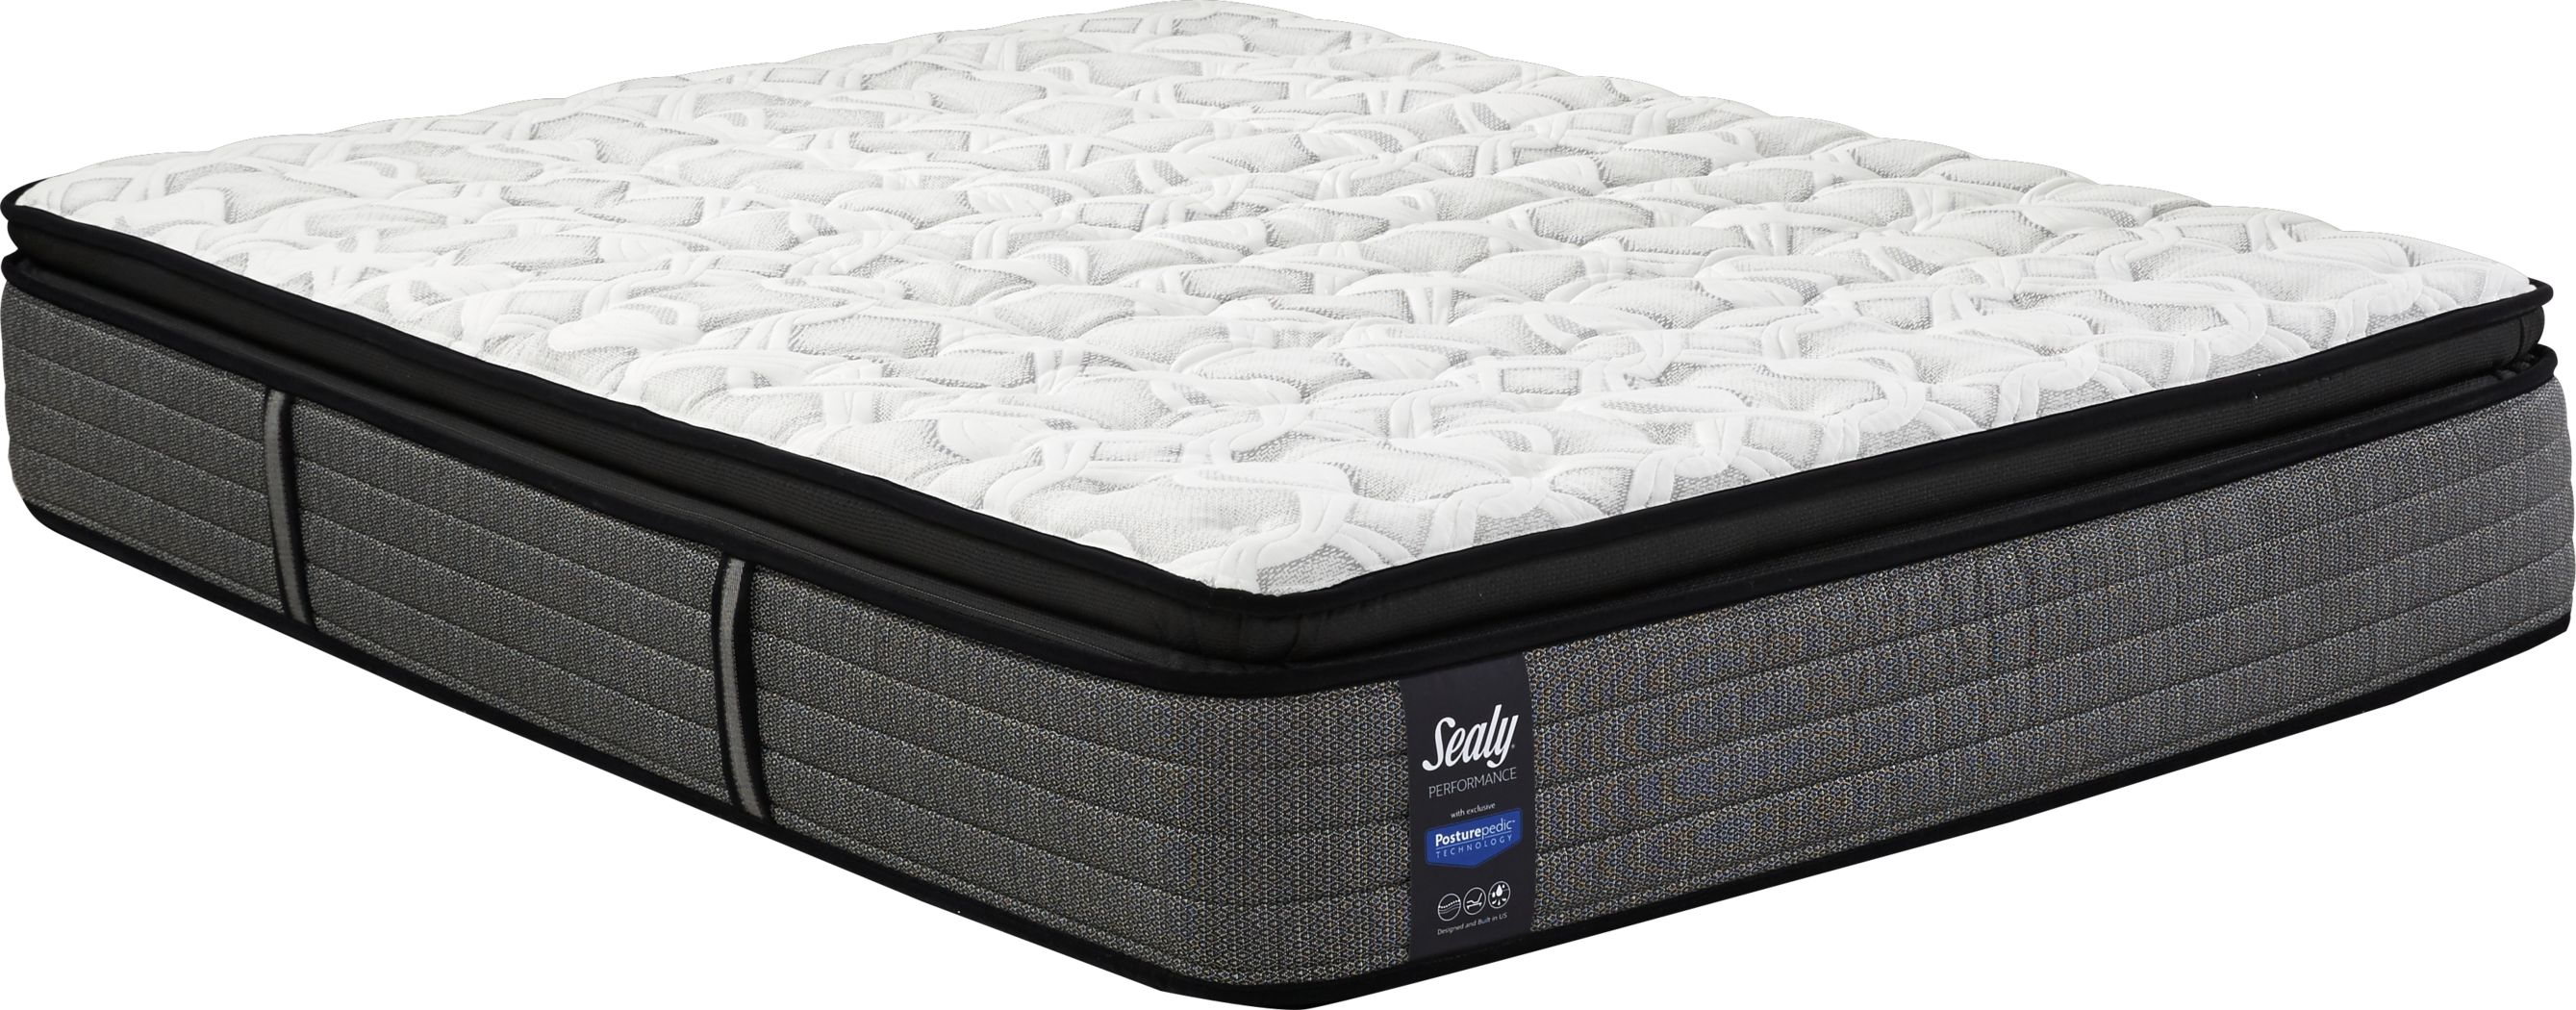 sealy epic firm king mattress review